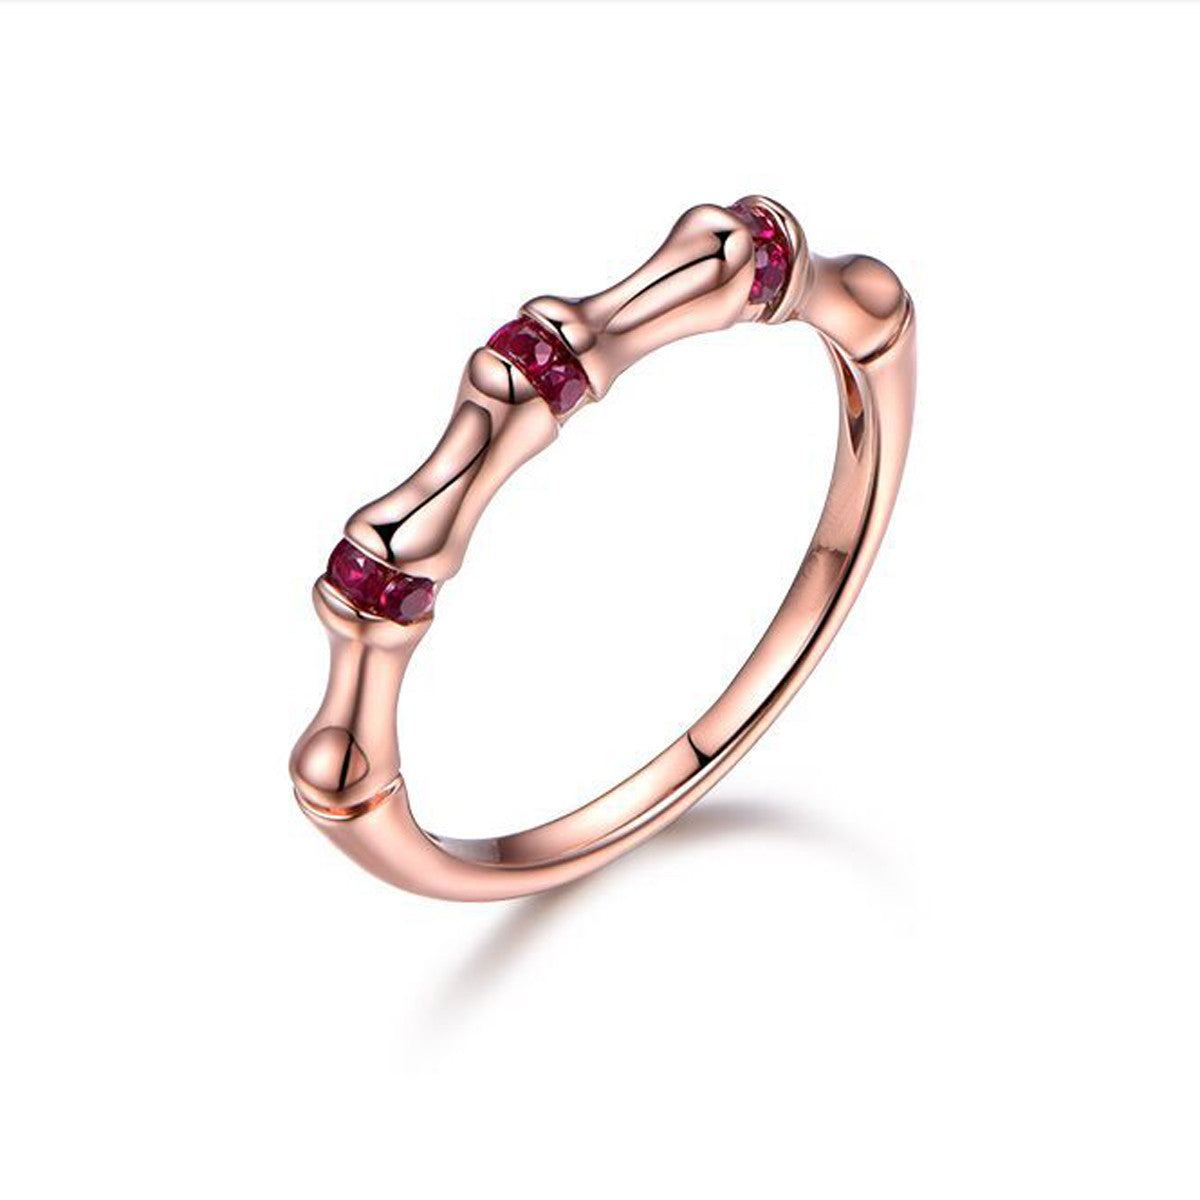 Ruby Wedding Band Anniversary Ring 14K Rose Gold - Lord of Gem Rings - 3